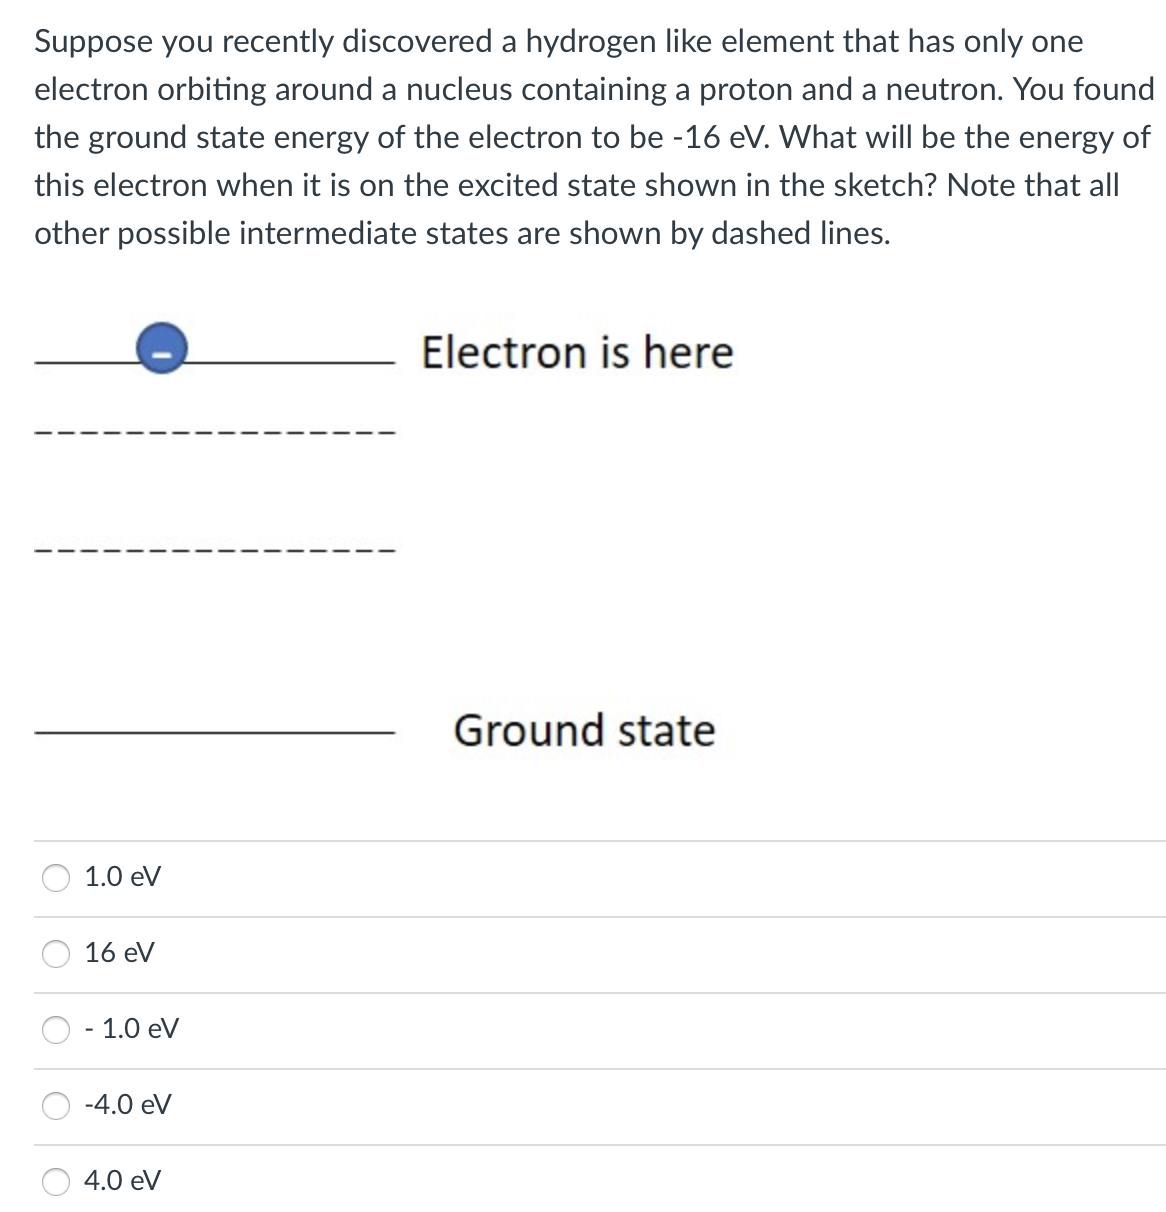 Suppose you recently discovered a hydrogen like element that has only one
electron orbiting around a nucleus containing a proton and a neutron. You found
the ground state energy of the electron to be -16 eV. What will be the energy of
this electron when it is on the excited state shown in the sketch? Note that all
other possible intermediate states are shown by dashed lines.
Electron is here
Ground state
1.0 eV
16 eV
- 1.0 eV
-4.0 eV
4.0 eV
